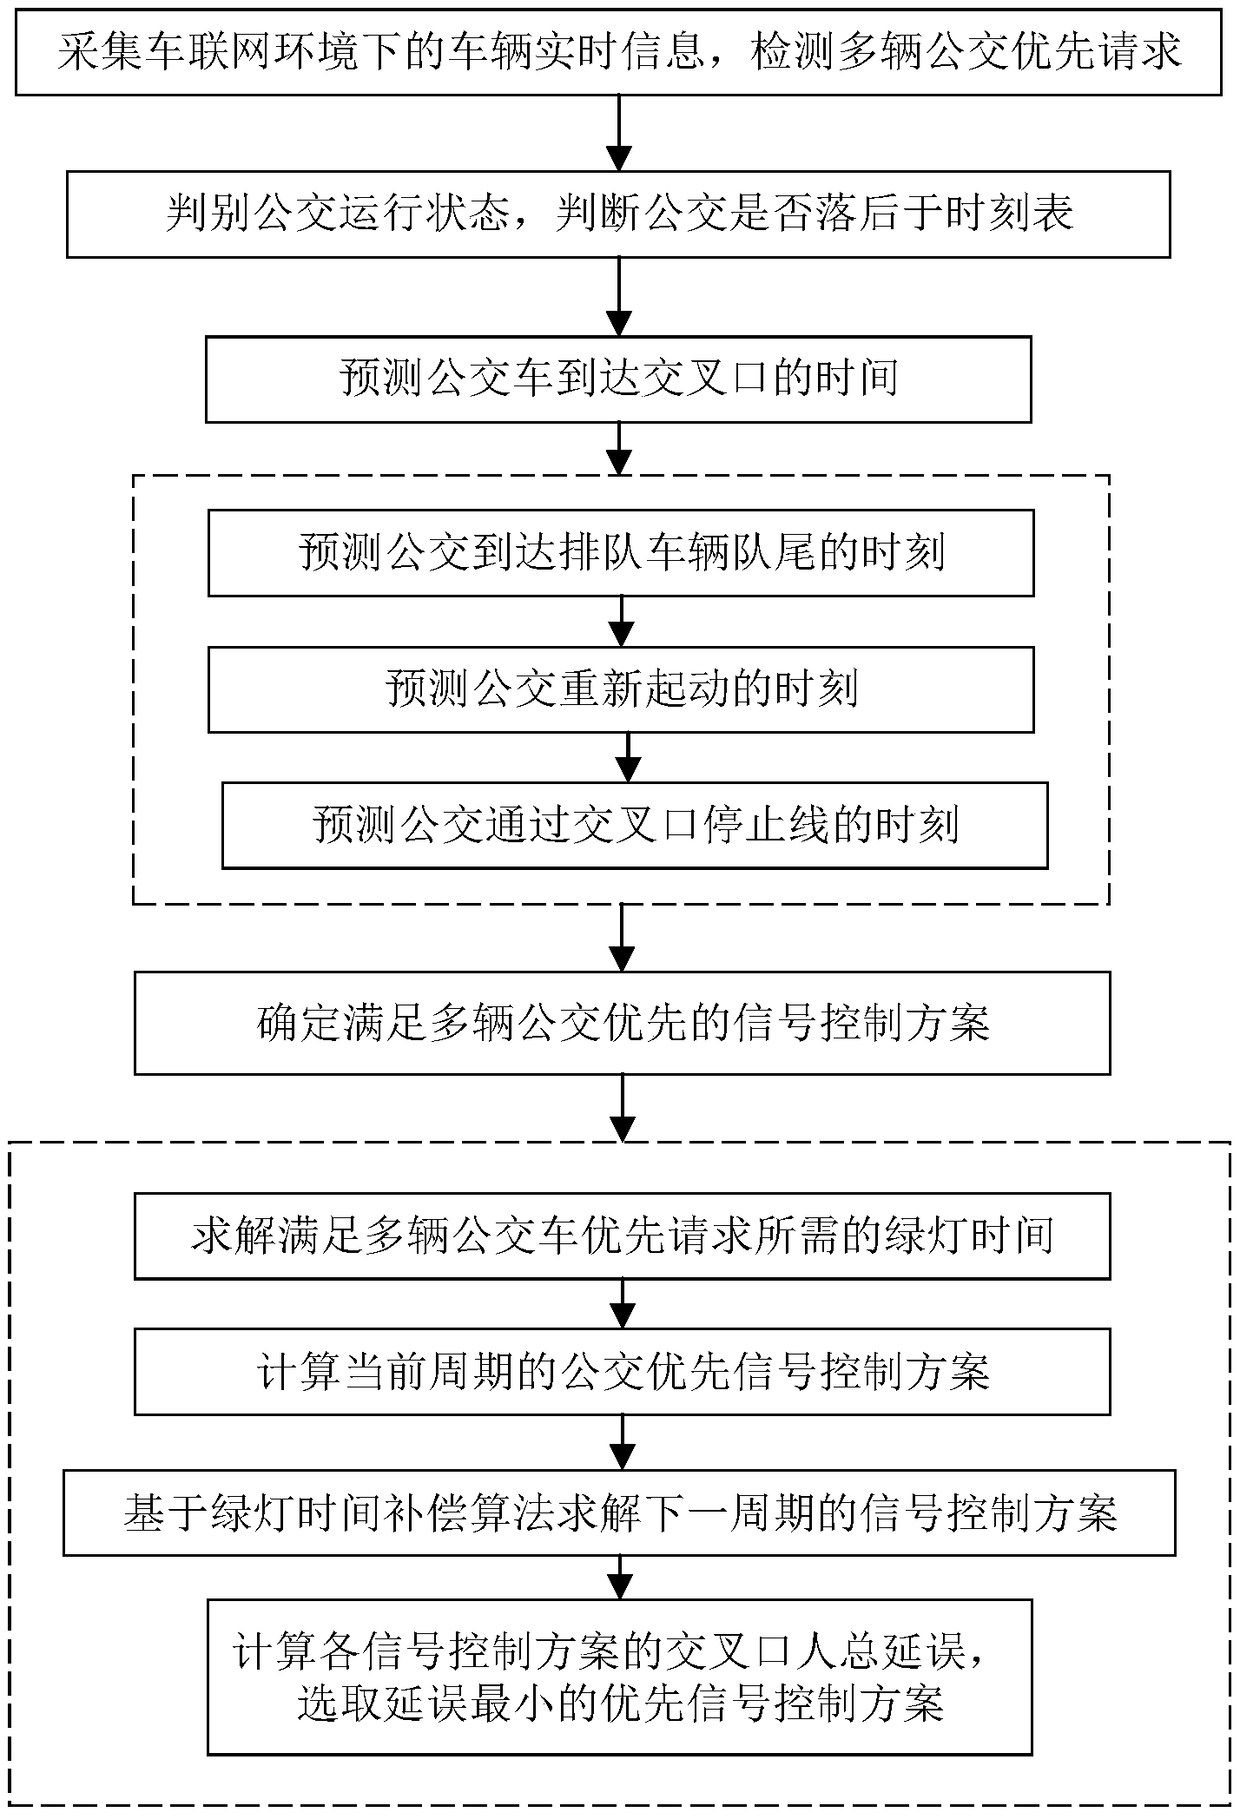 Bus priority signal control method based on multiple requests in vehicle networking environment